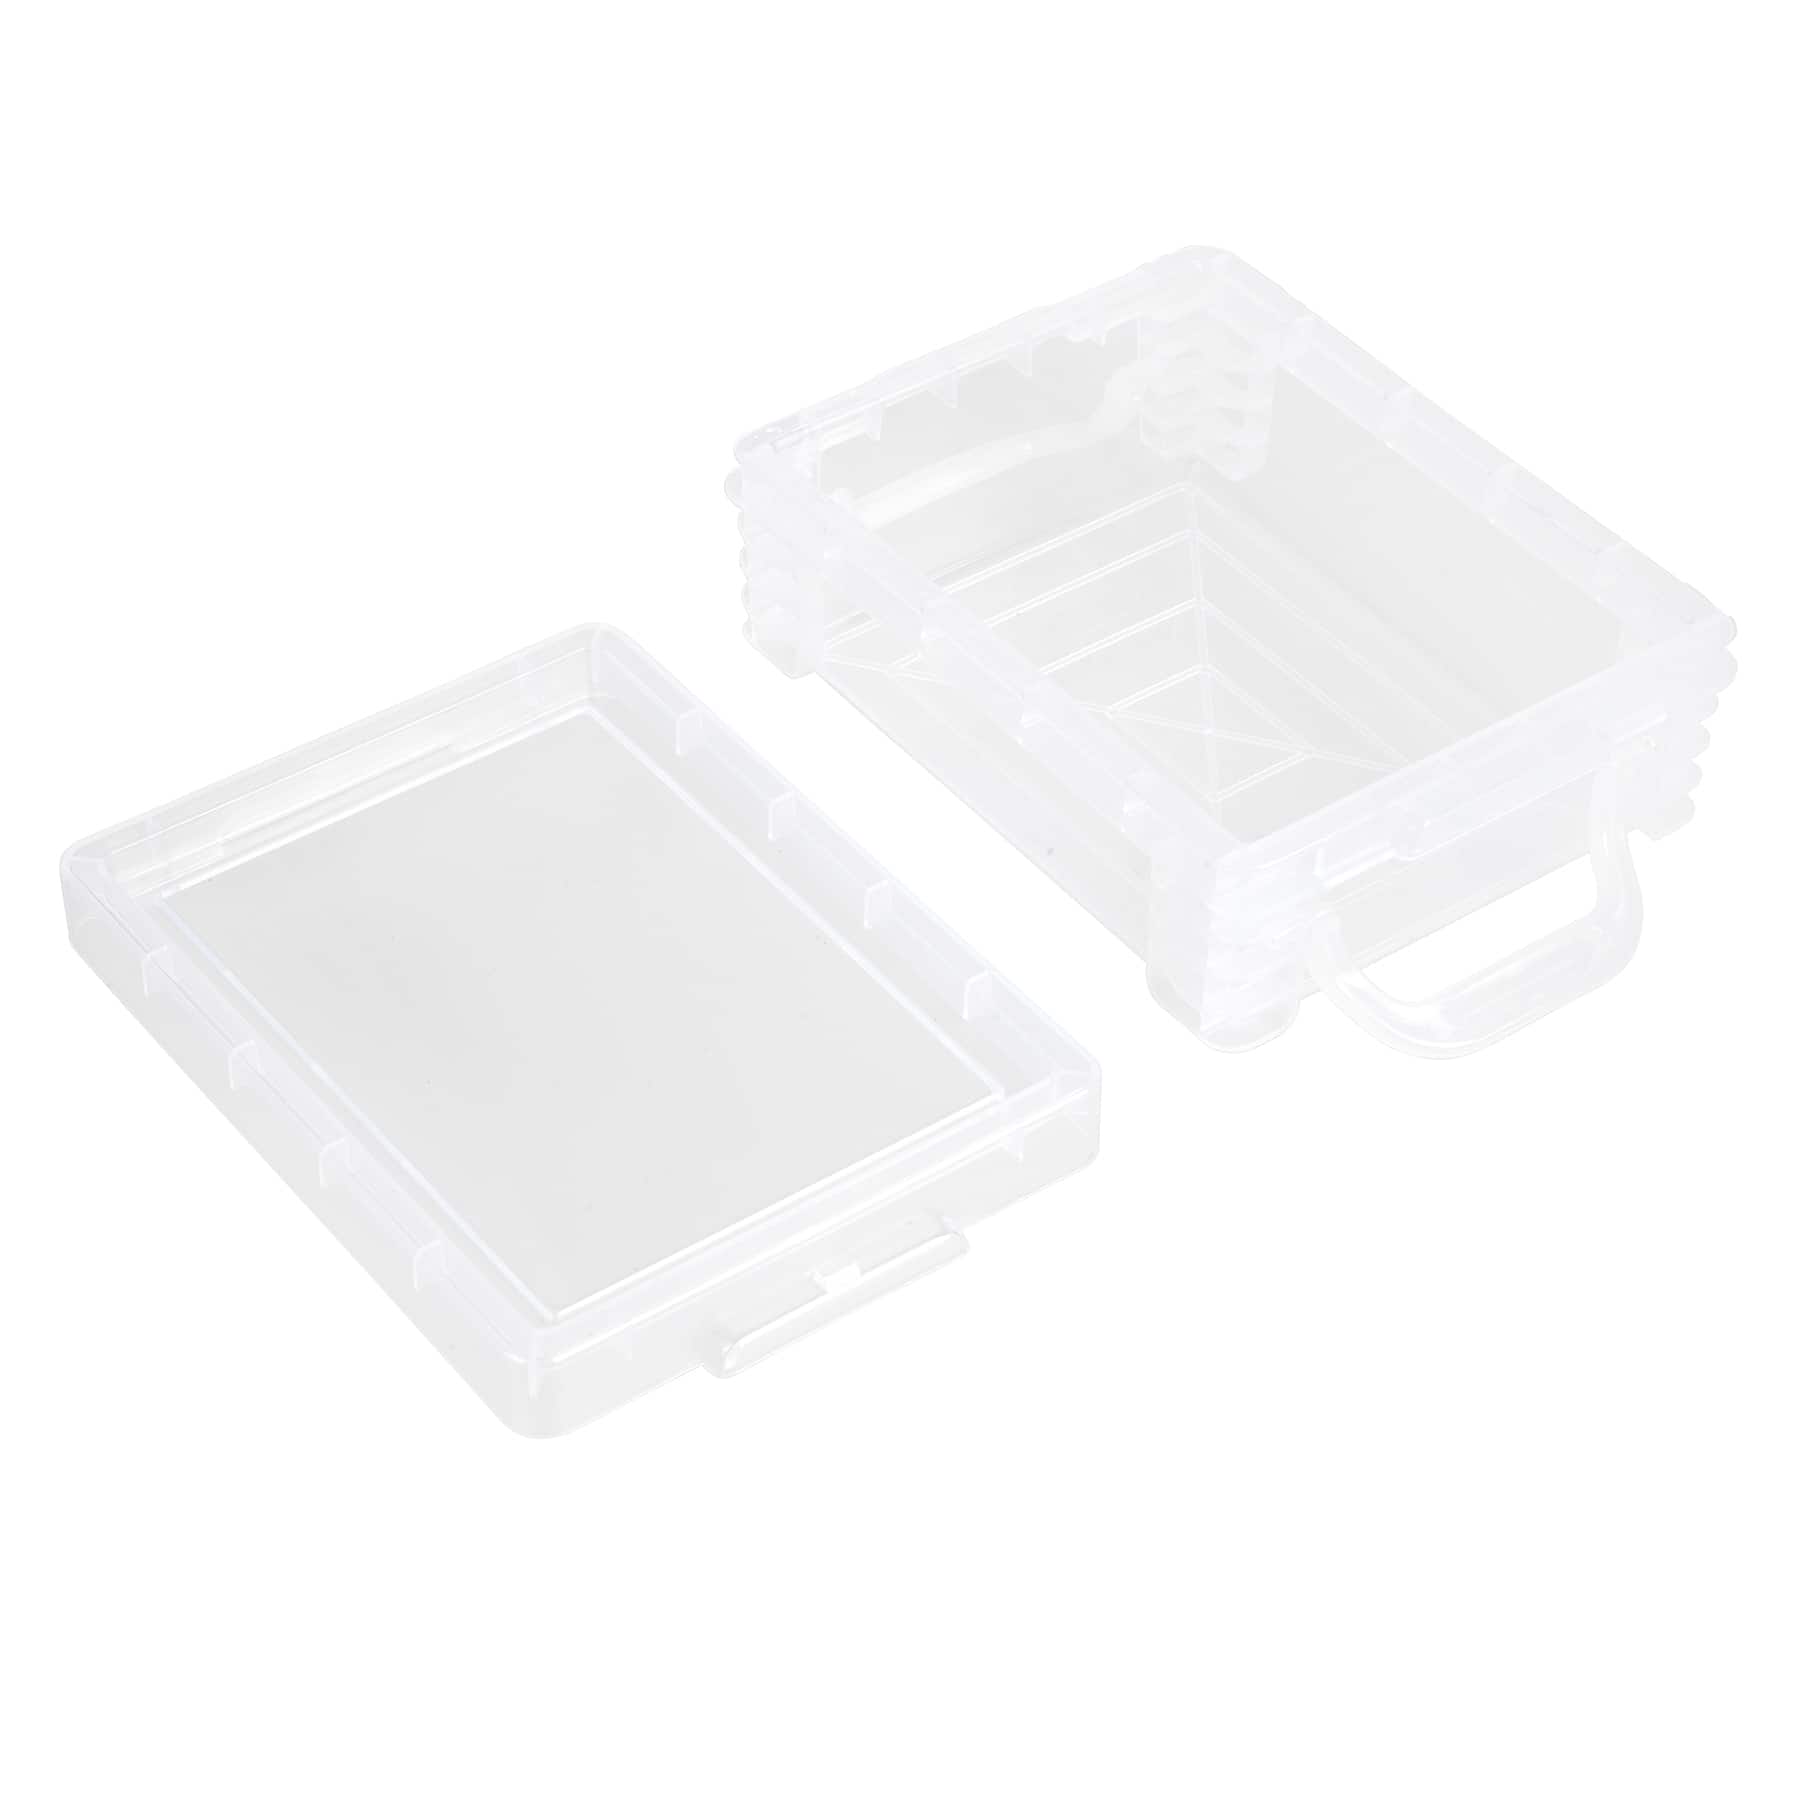 5 Super Stacker Crayon Boxes/Clear Plastic Small Storage Container/Homeschool